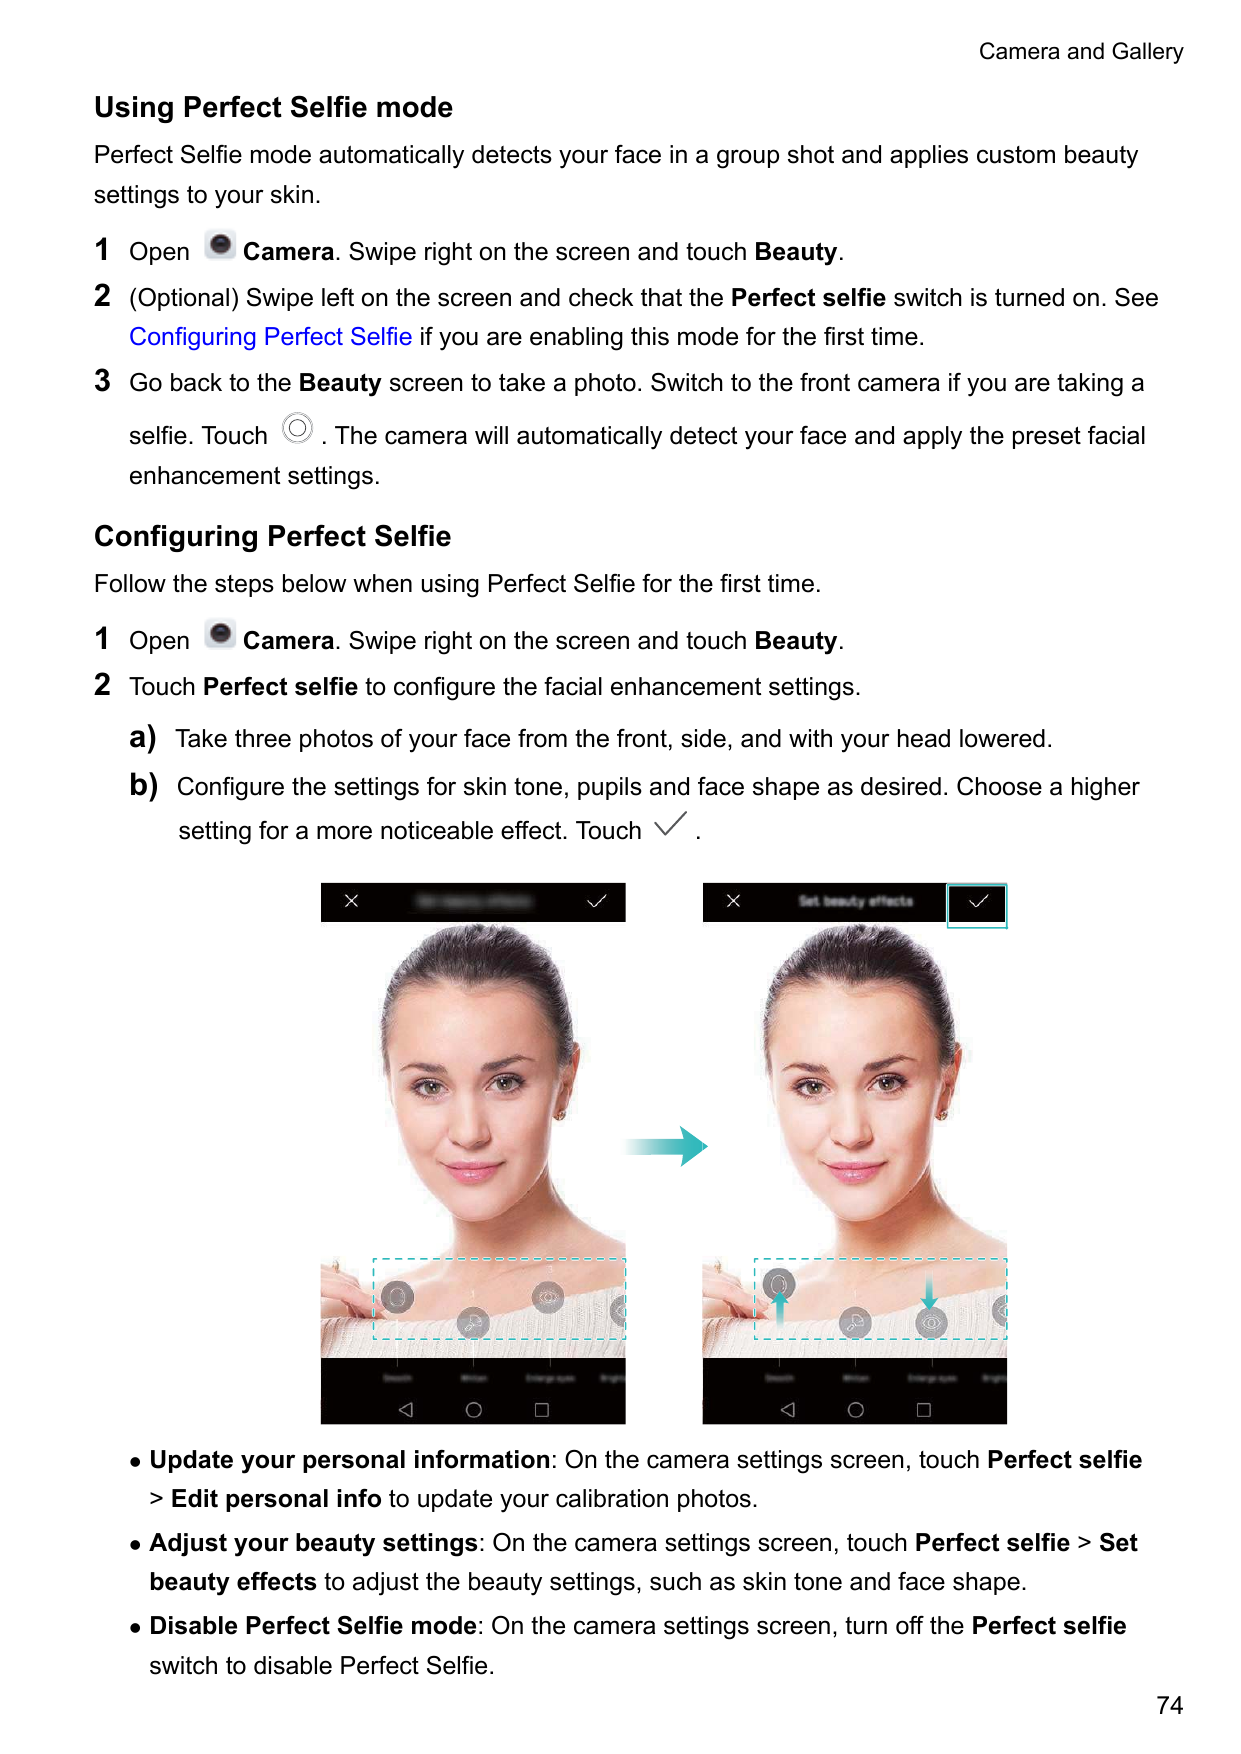 Camera and GalleryUsing Perfect Selfie modePerfect Selfie mode automatically detects your face in a group shot and applies custo